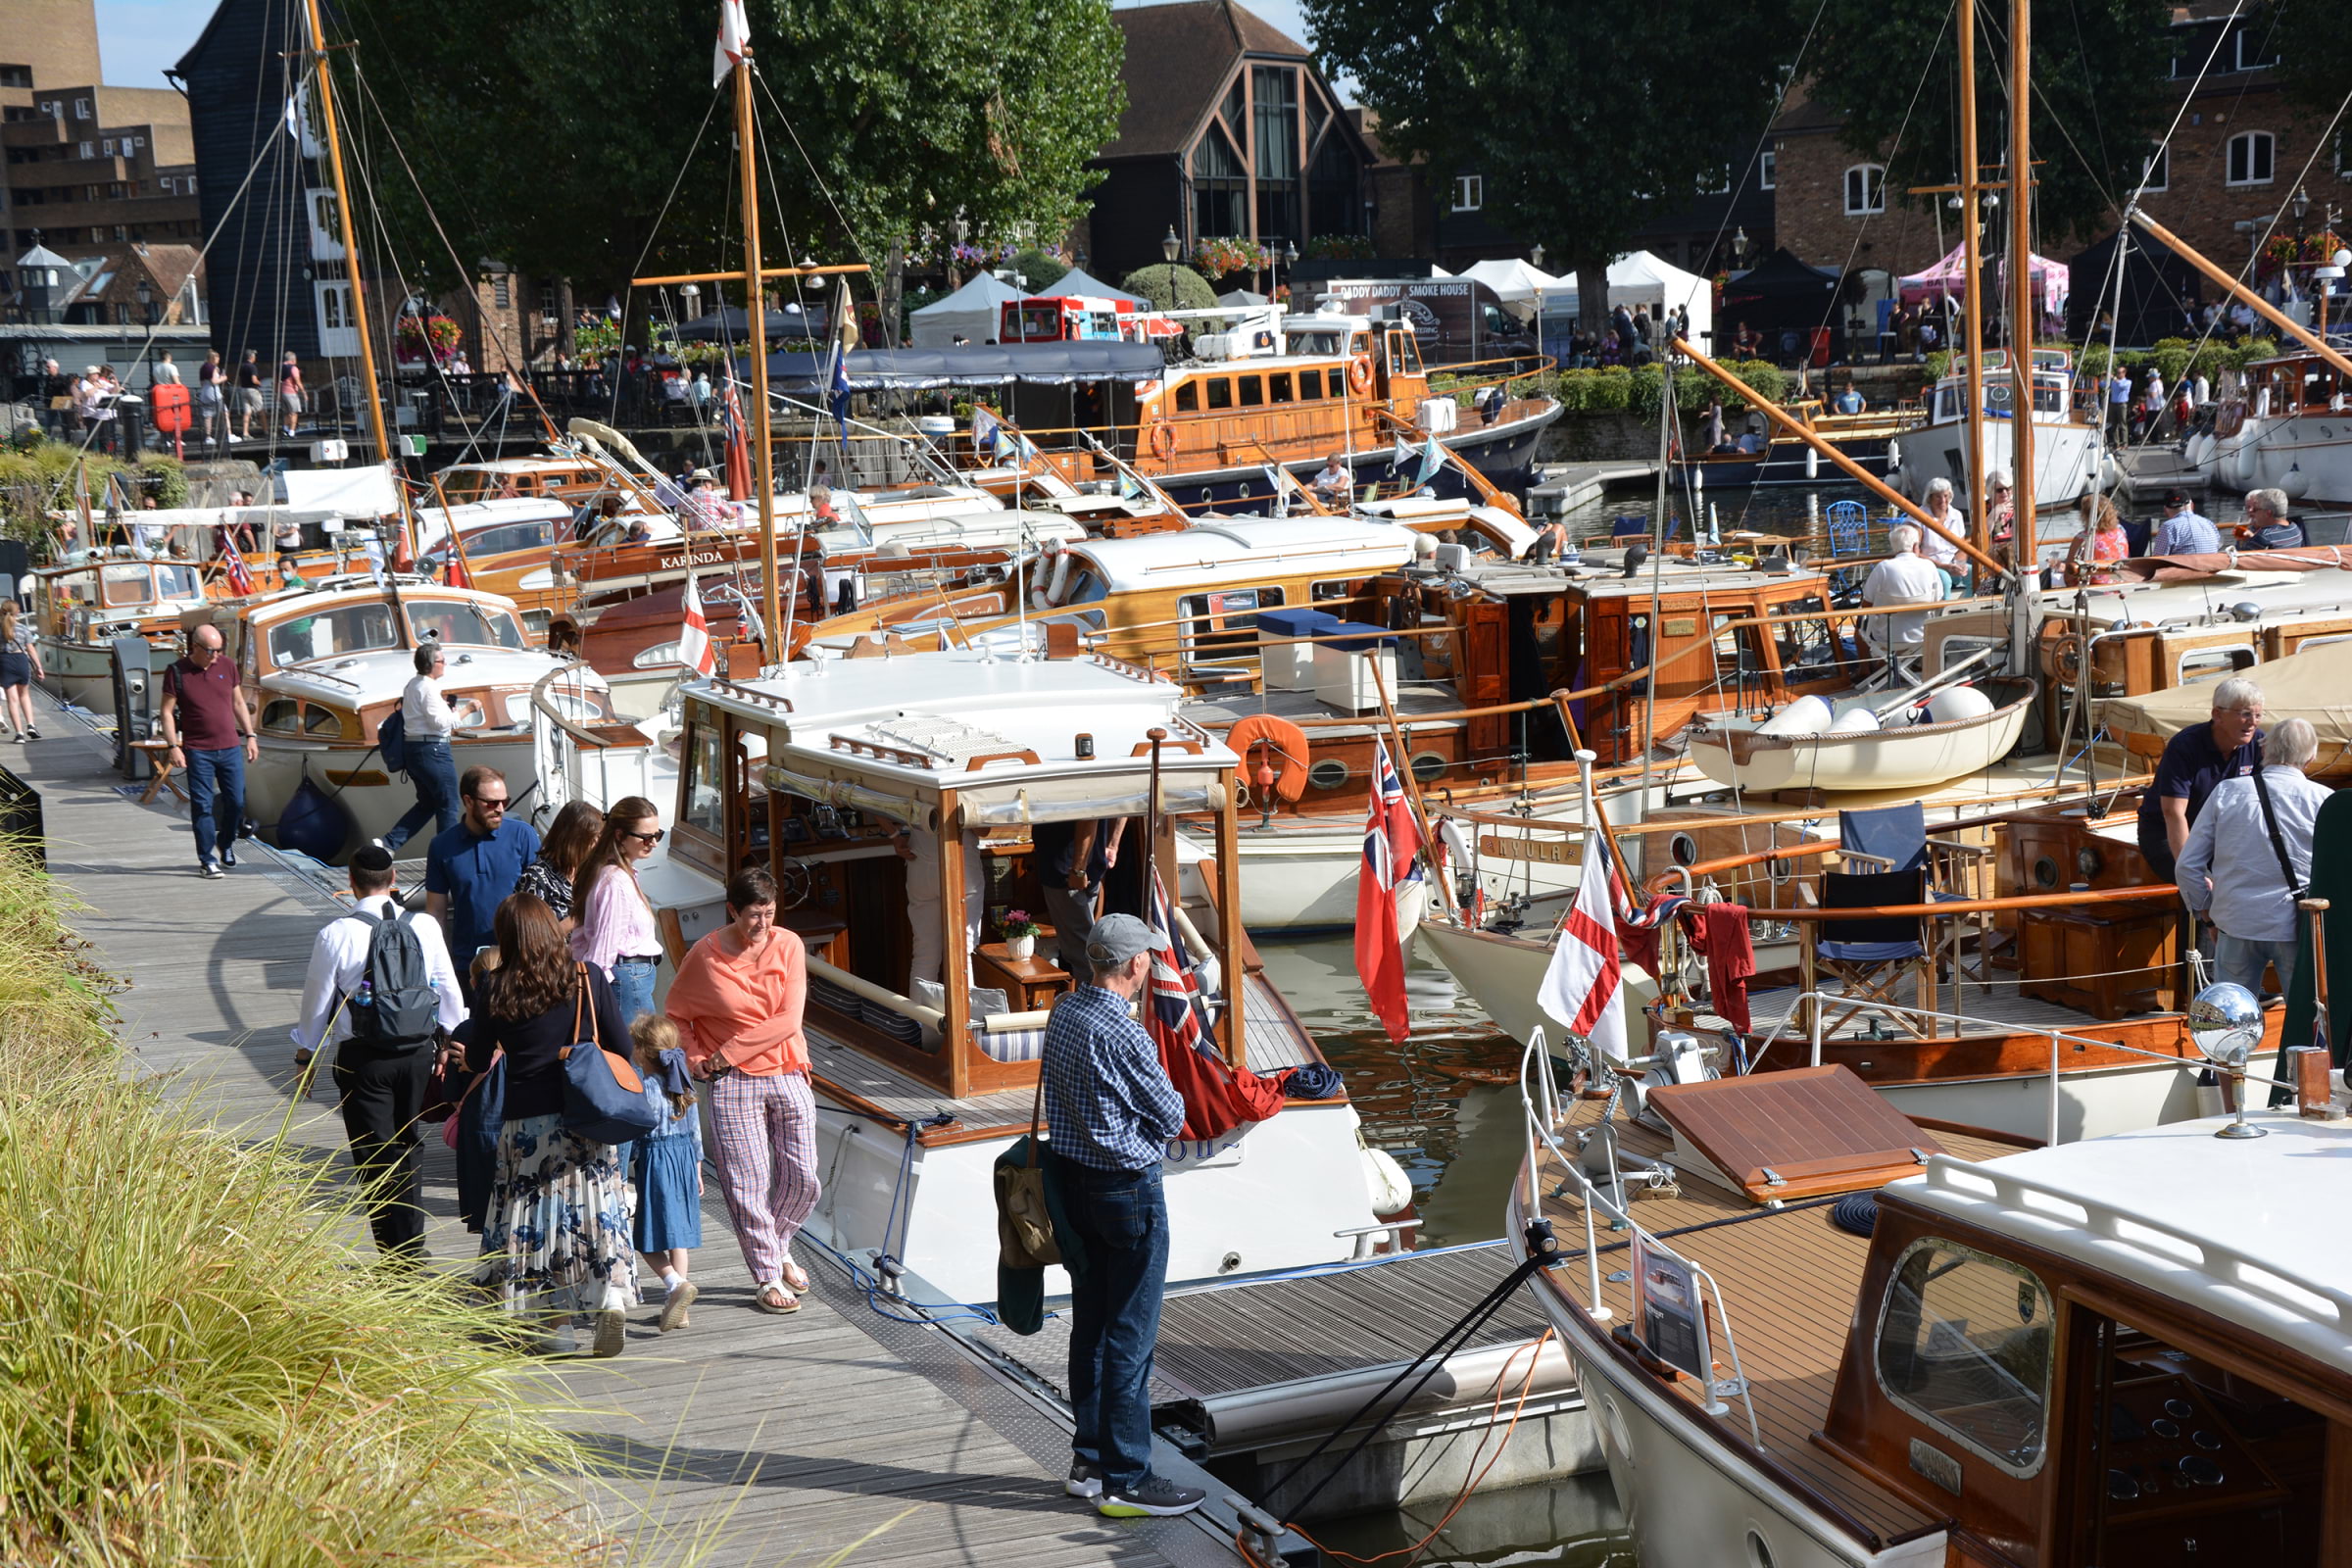 Explore vintage vessels at the Classic Boat Festival